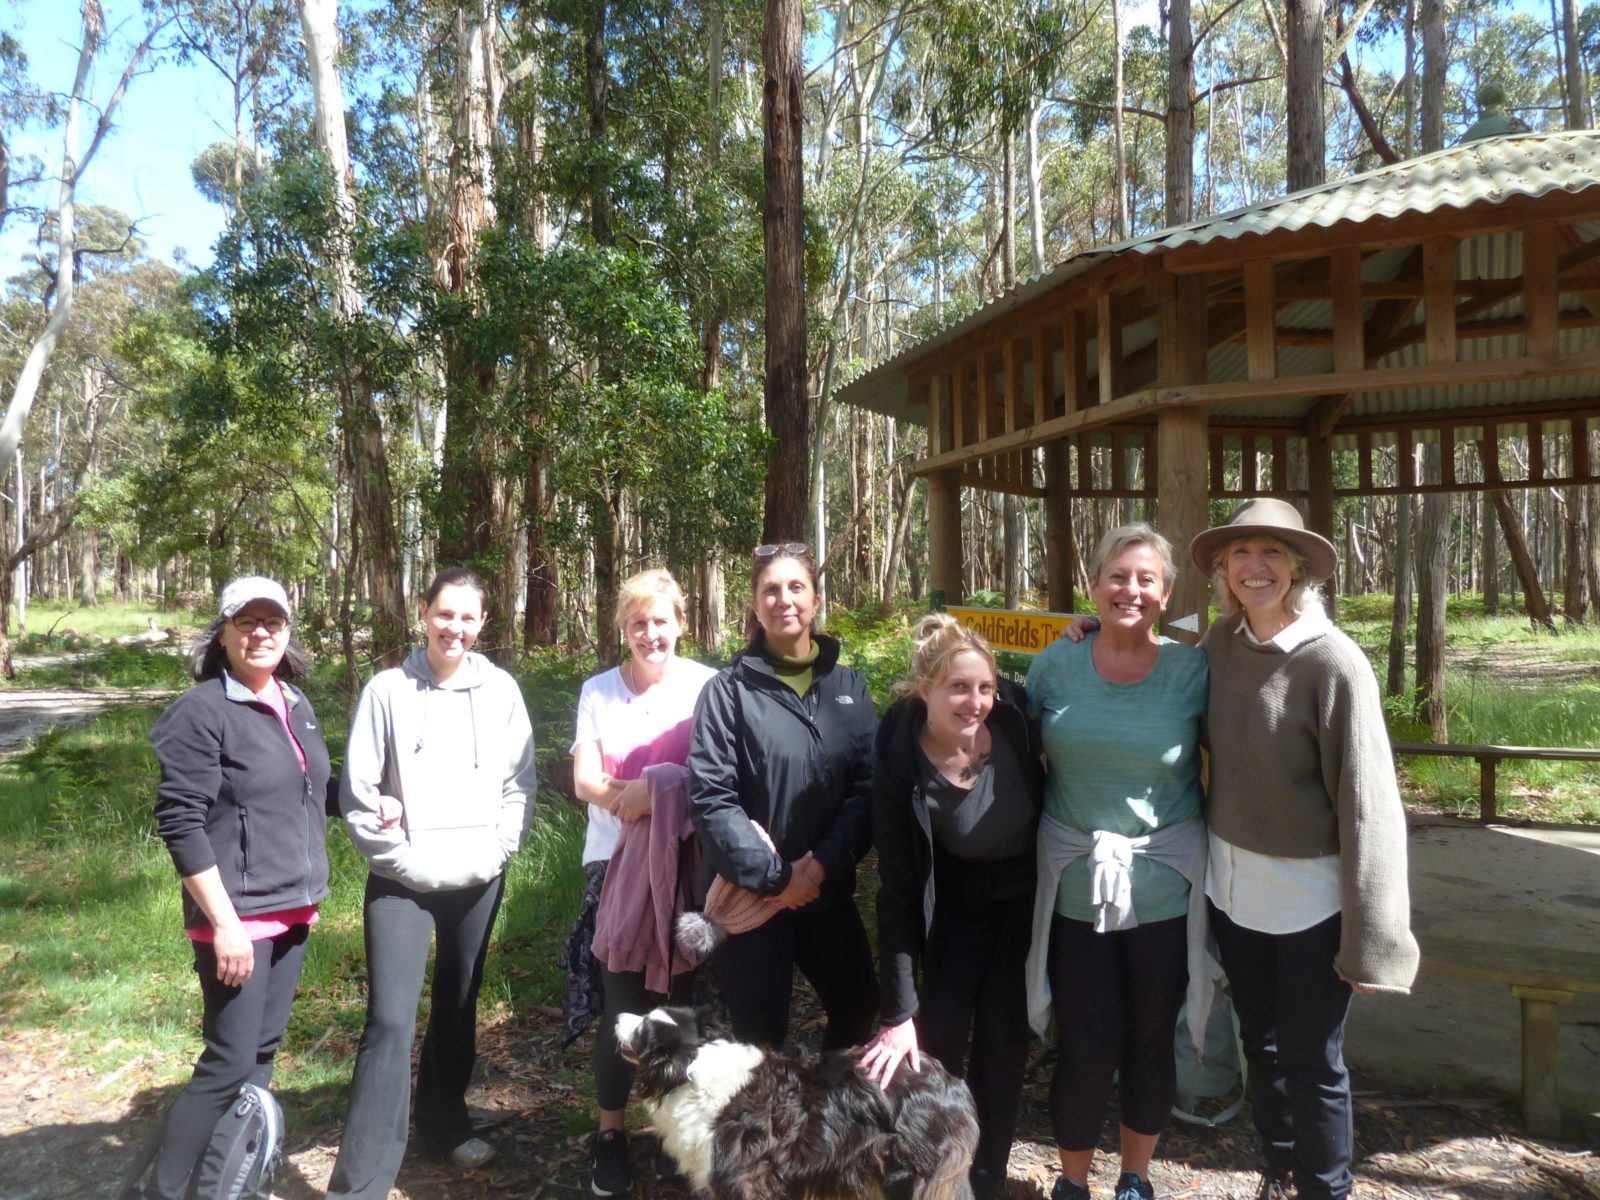 Group photo in Wombat State Forest